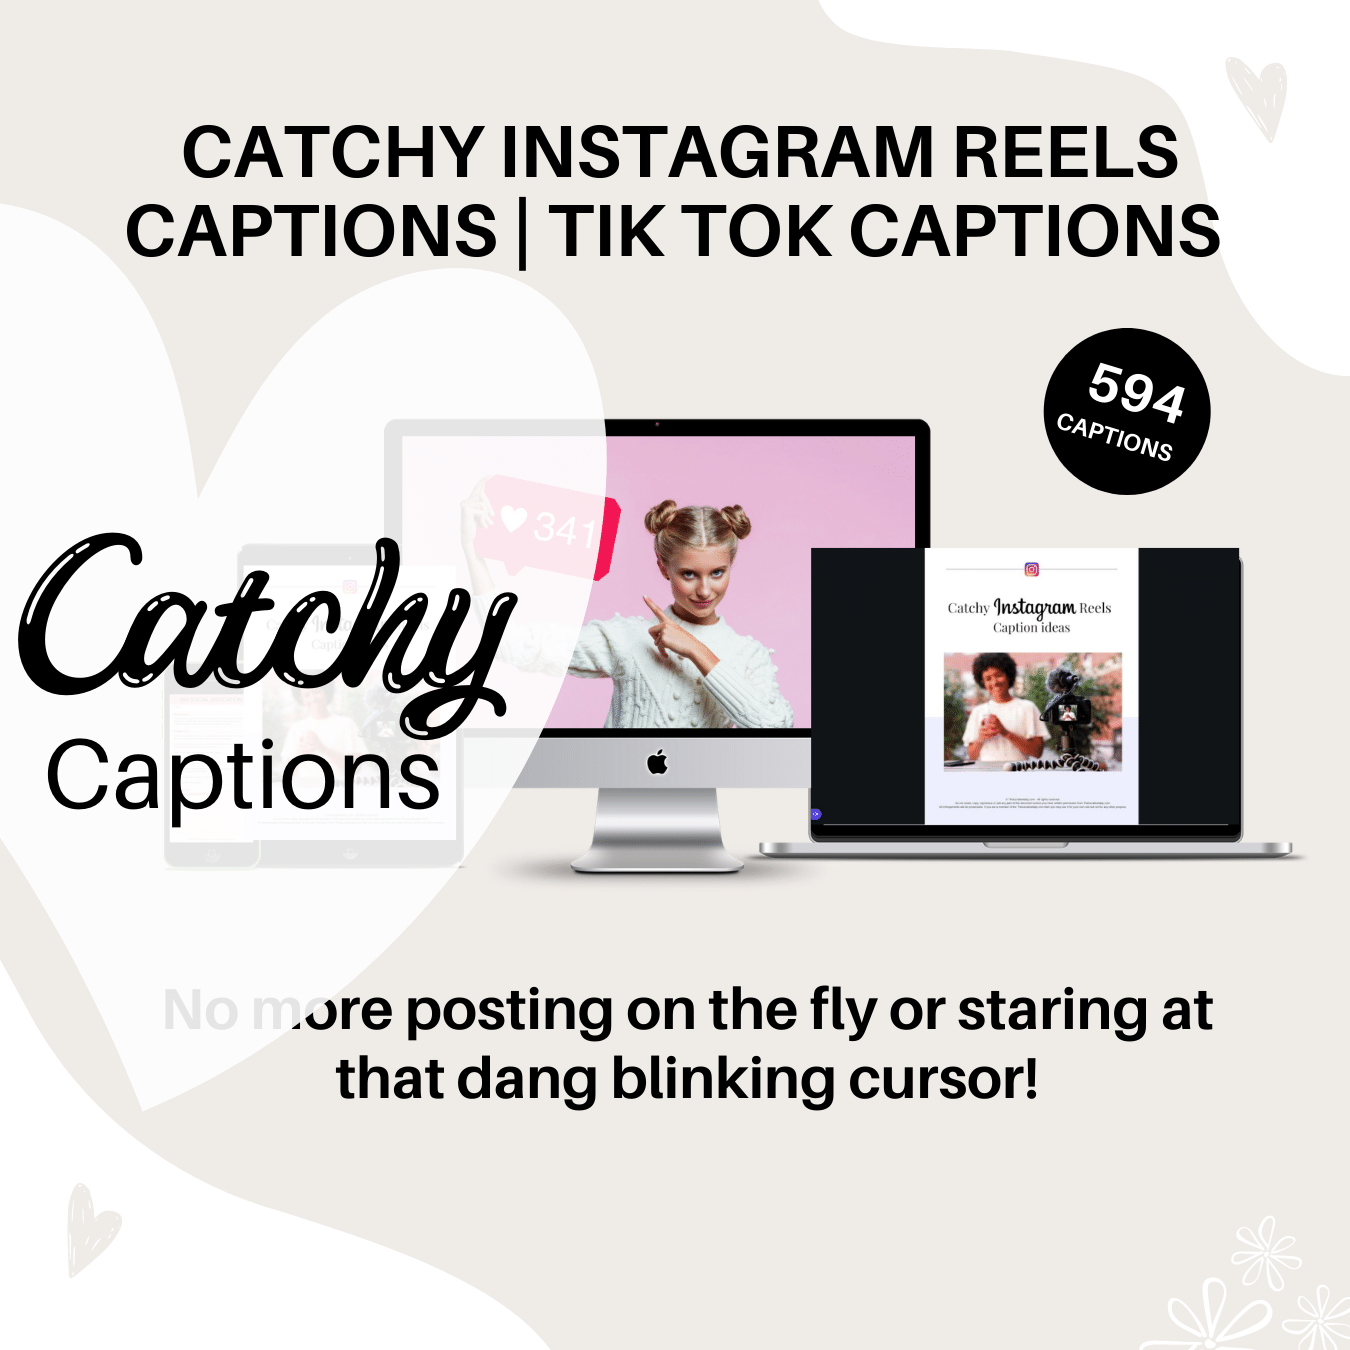 500+ Done-For-You Instagram Reels Captions for influencers